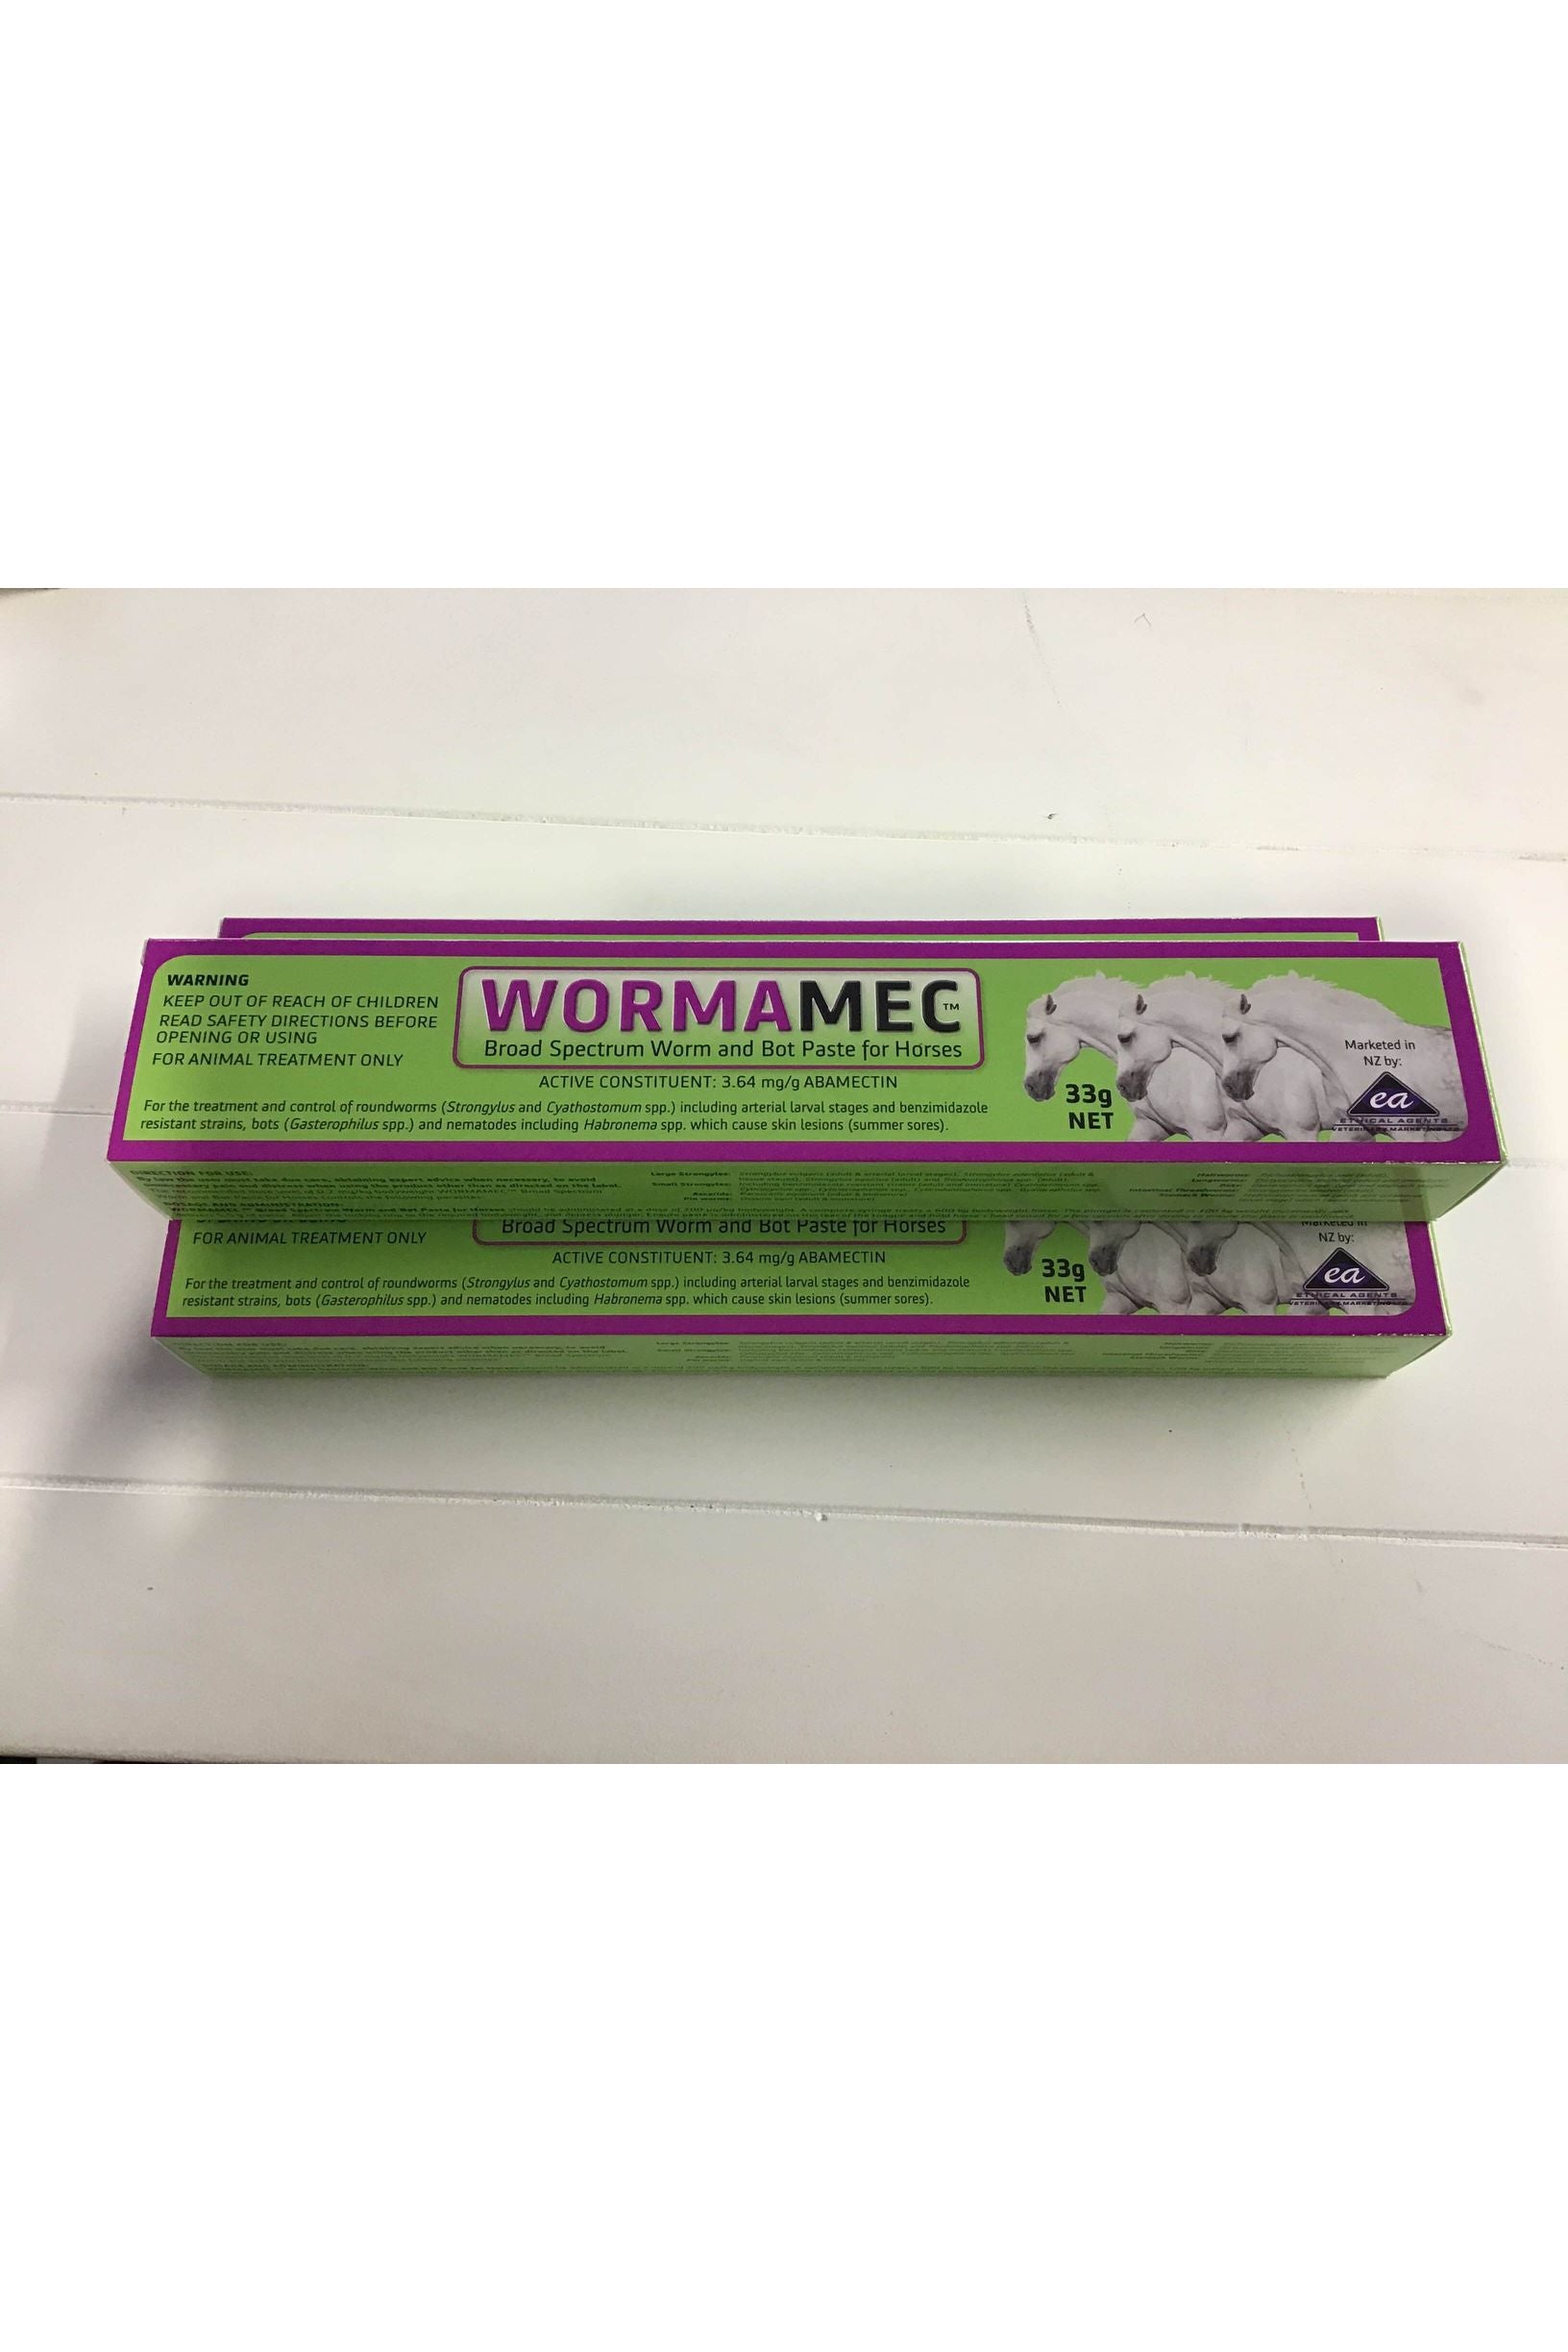 Wormamec Broad Spectrum Worm & Bot Paste for Horses Veterinary Products 